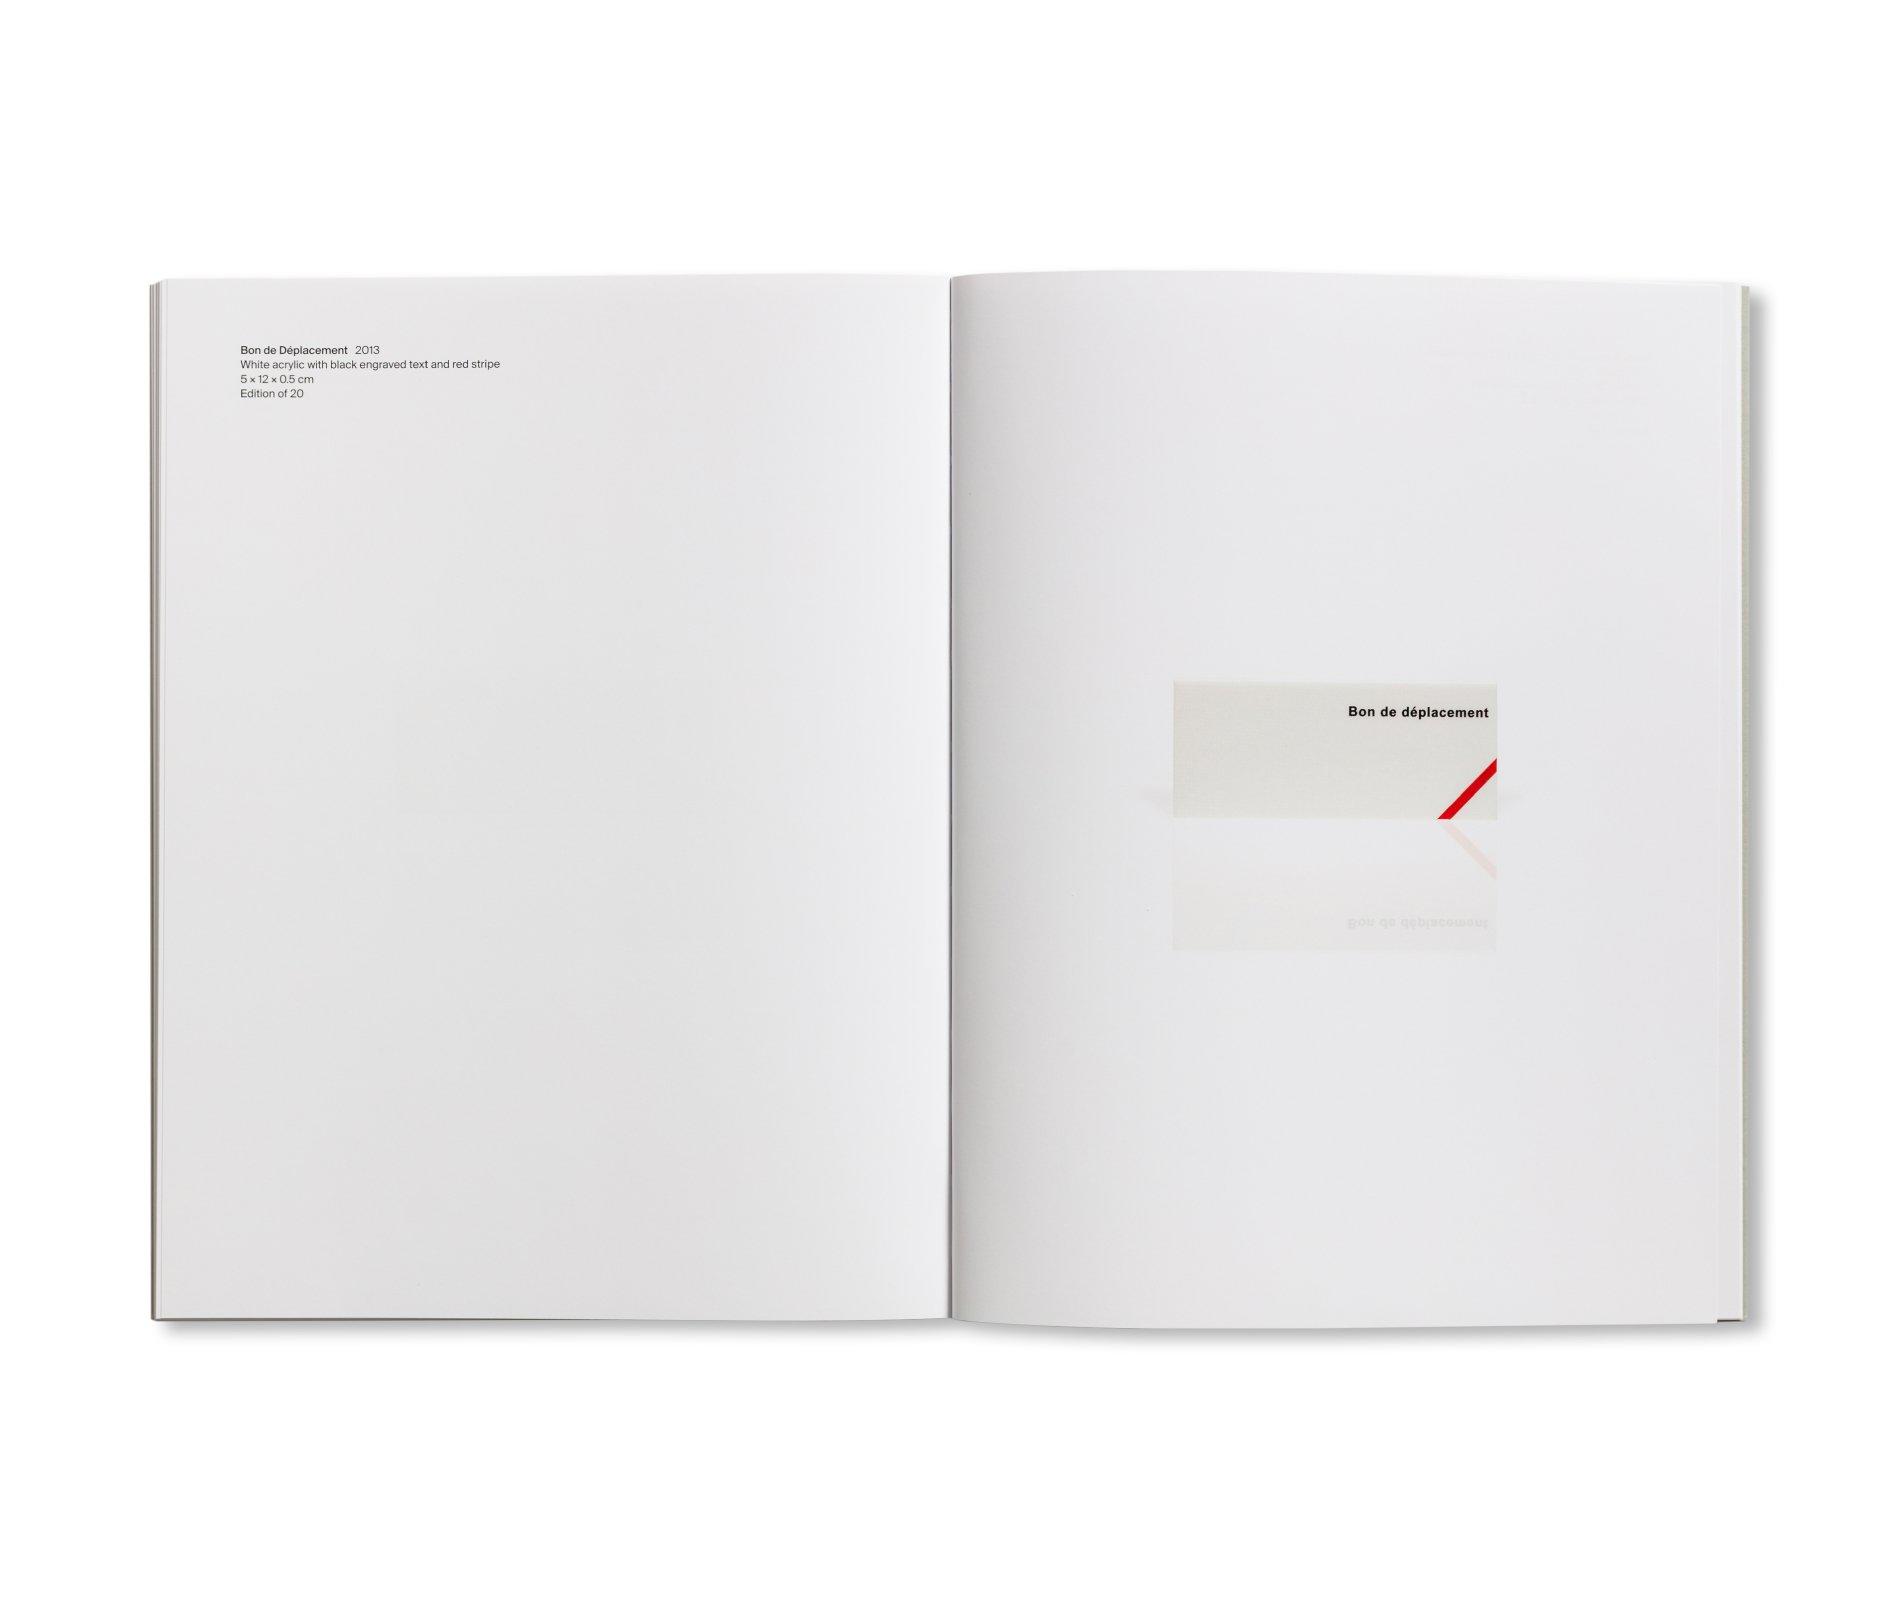 PRINTS AND MULTIPLES/ANNA BLESSMANN AND PETER SAVILLE by Peter Saville　作品集